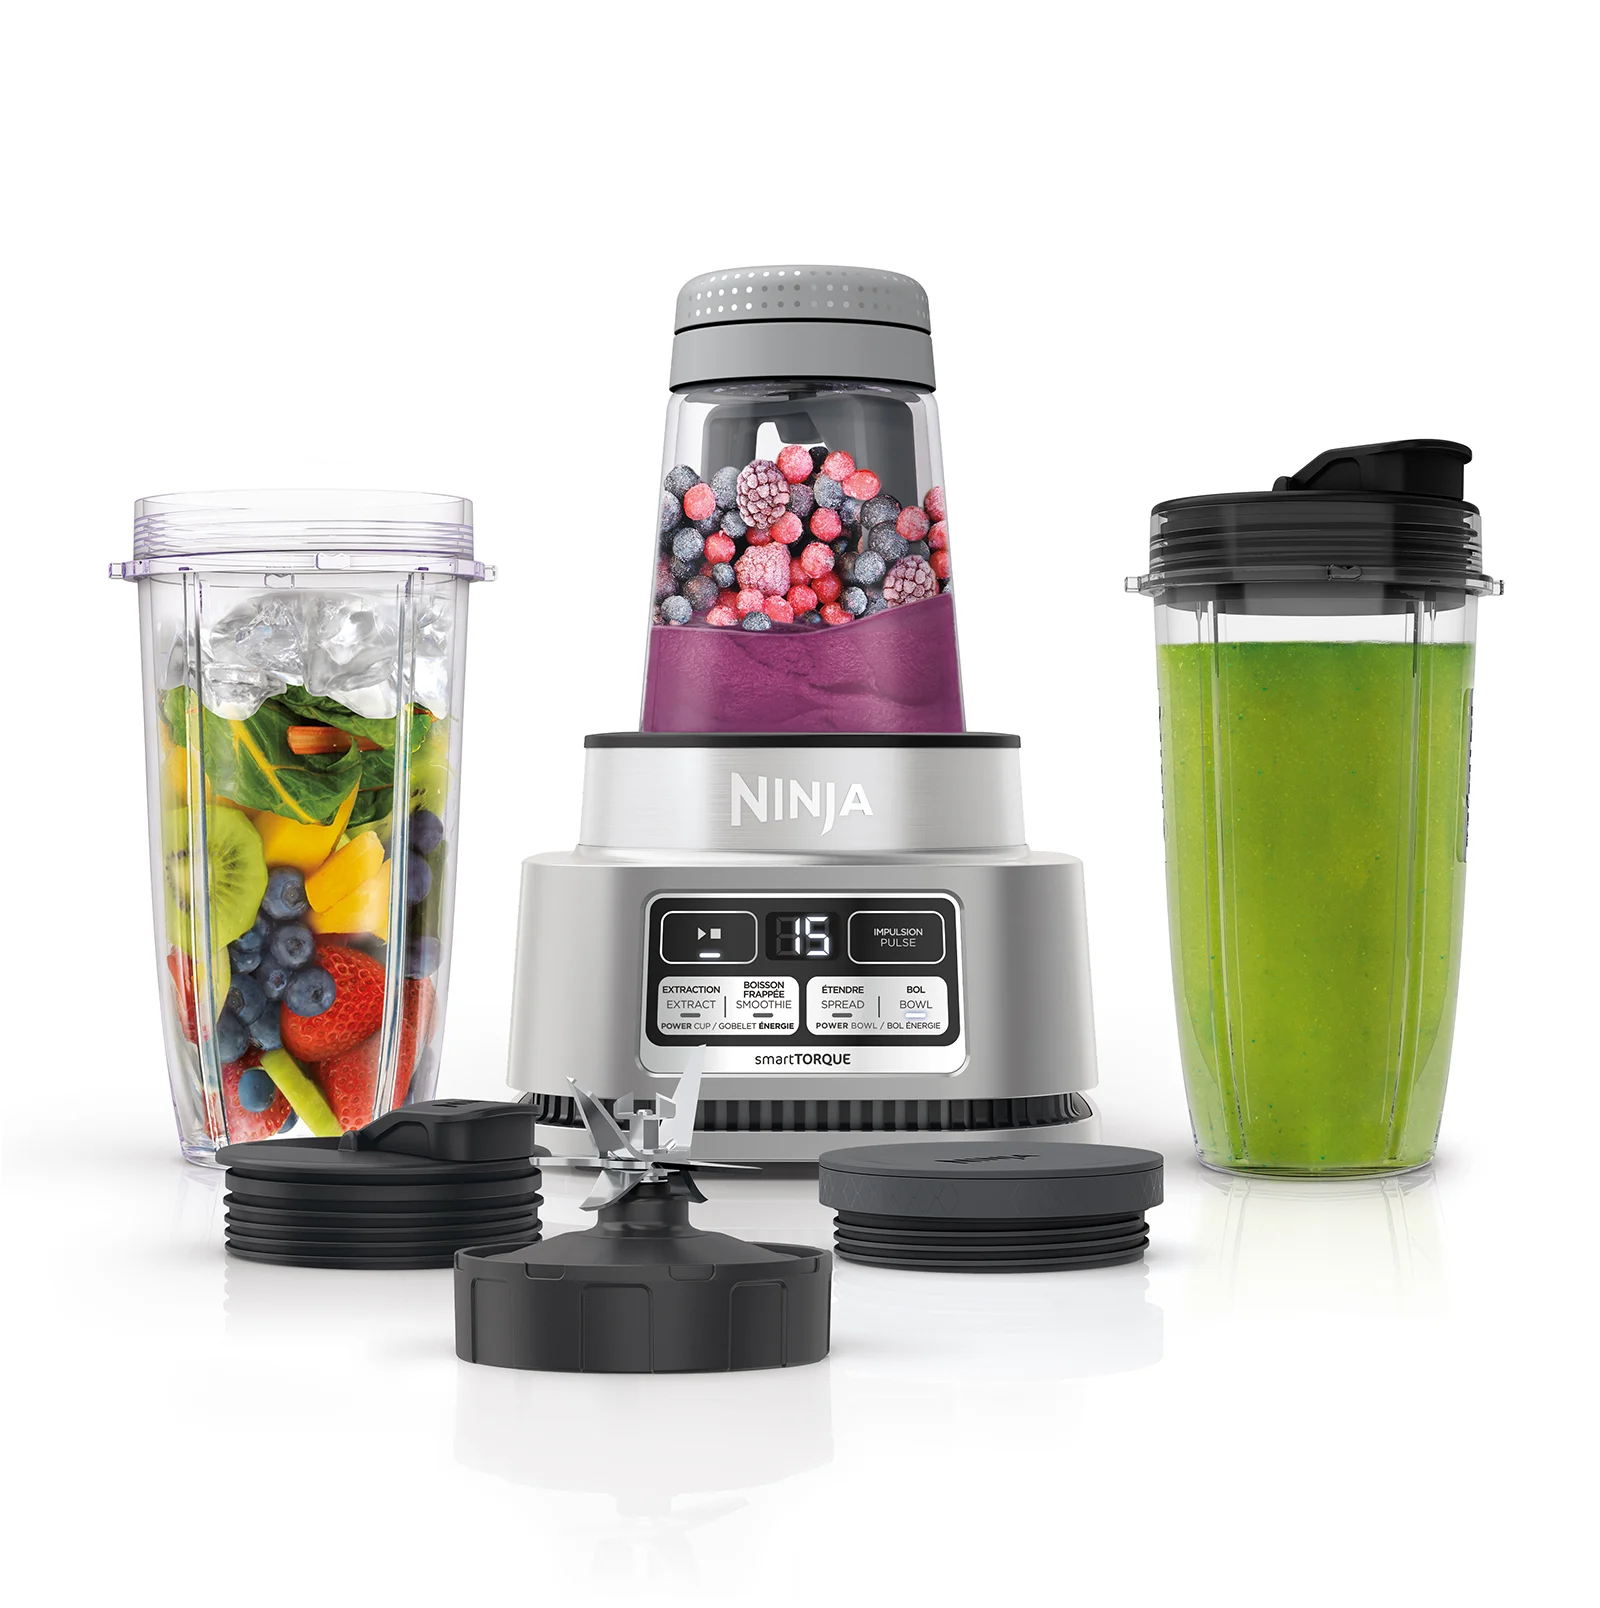 A multipurpose blender with accessories